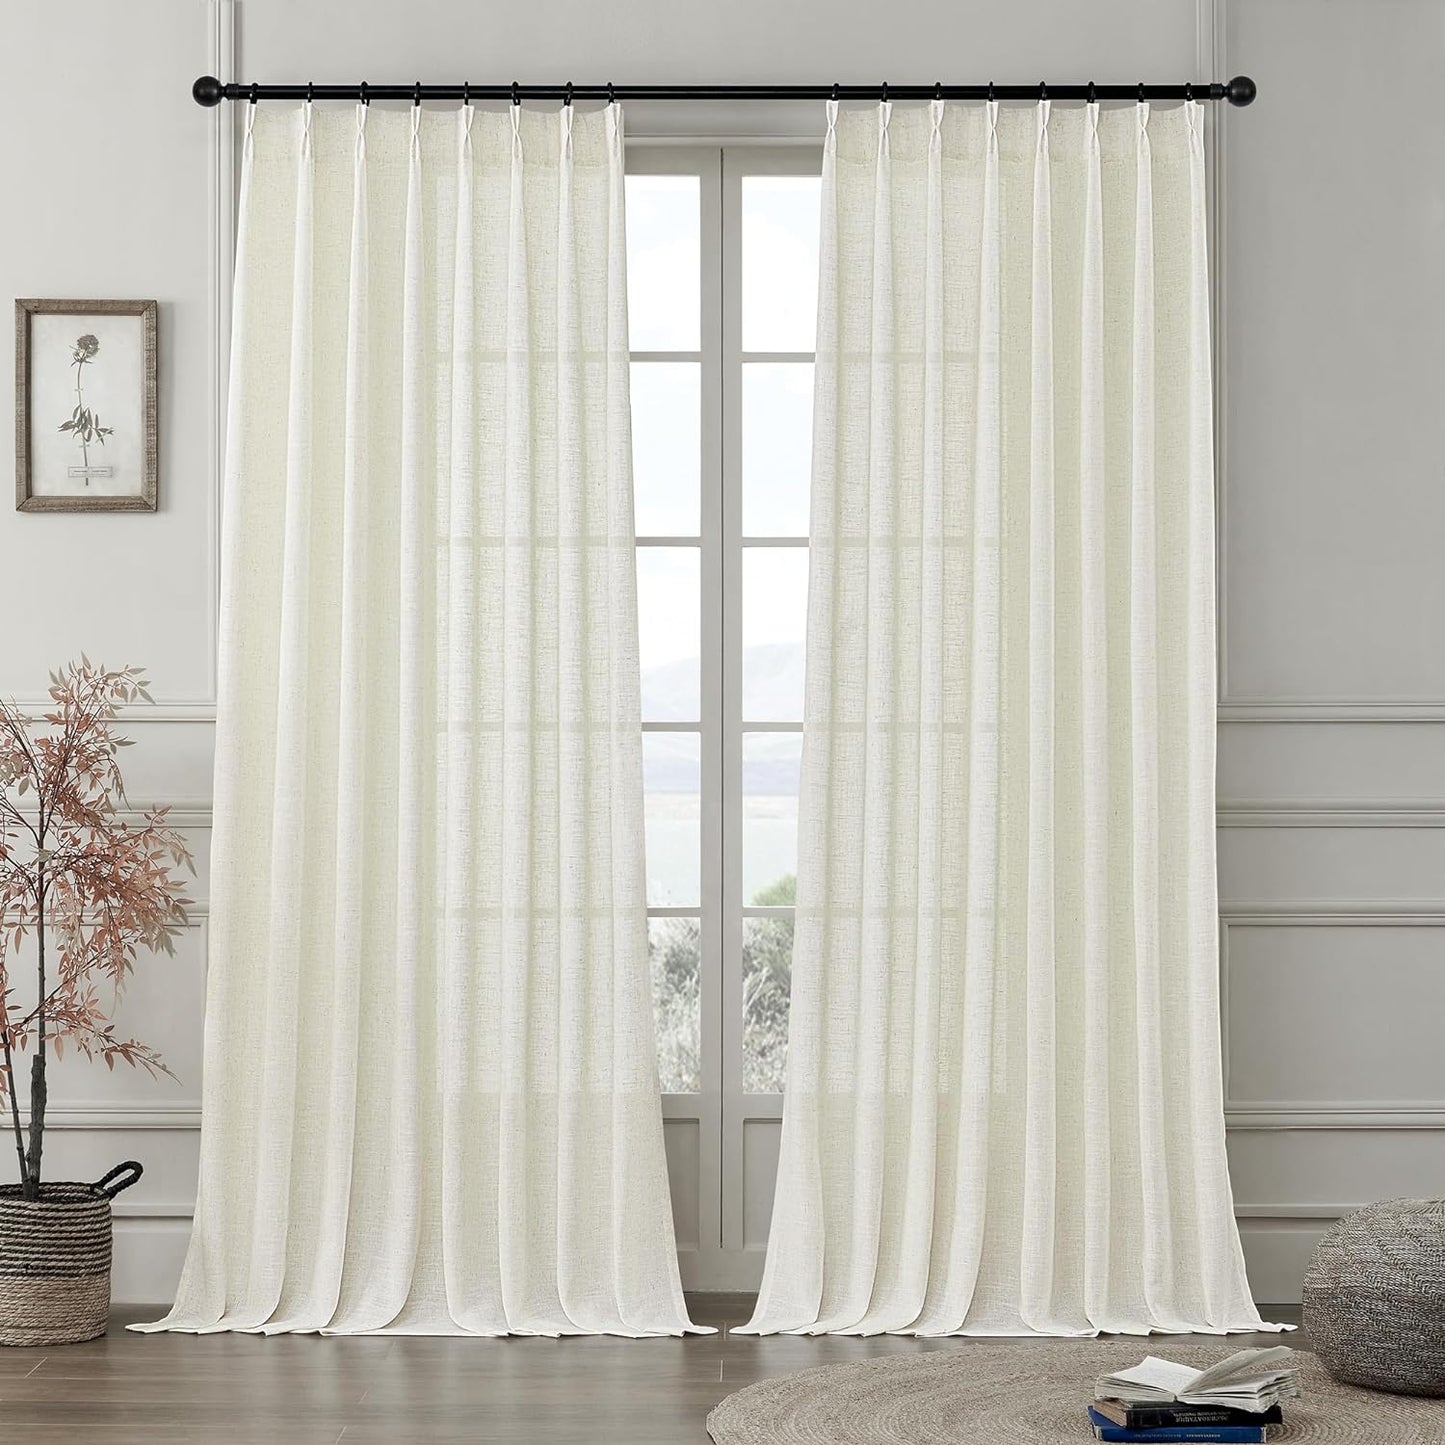 MASWOND White Pinch Pleated Curtains 90 Inches Long 2 Panels for Living Room Semi Sheer Linen Curtains Pinch Pleat Drapes for Traverse Rod Light Filtering Curtains for Dining Bedroom W38Xl90 Length  MASWOND Natural 50X108 